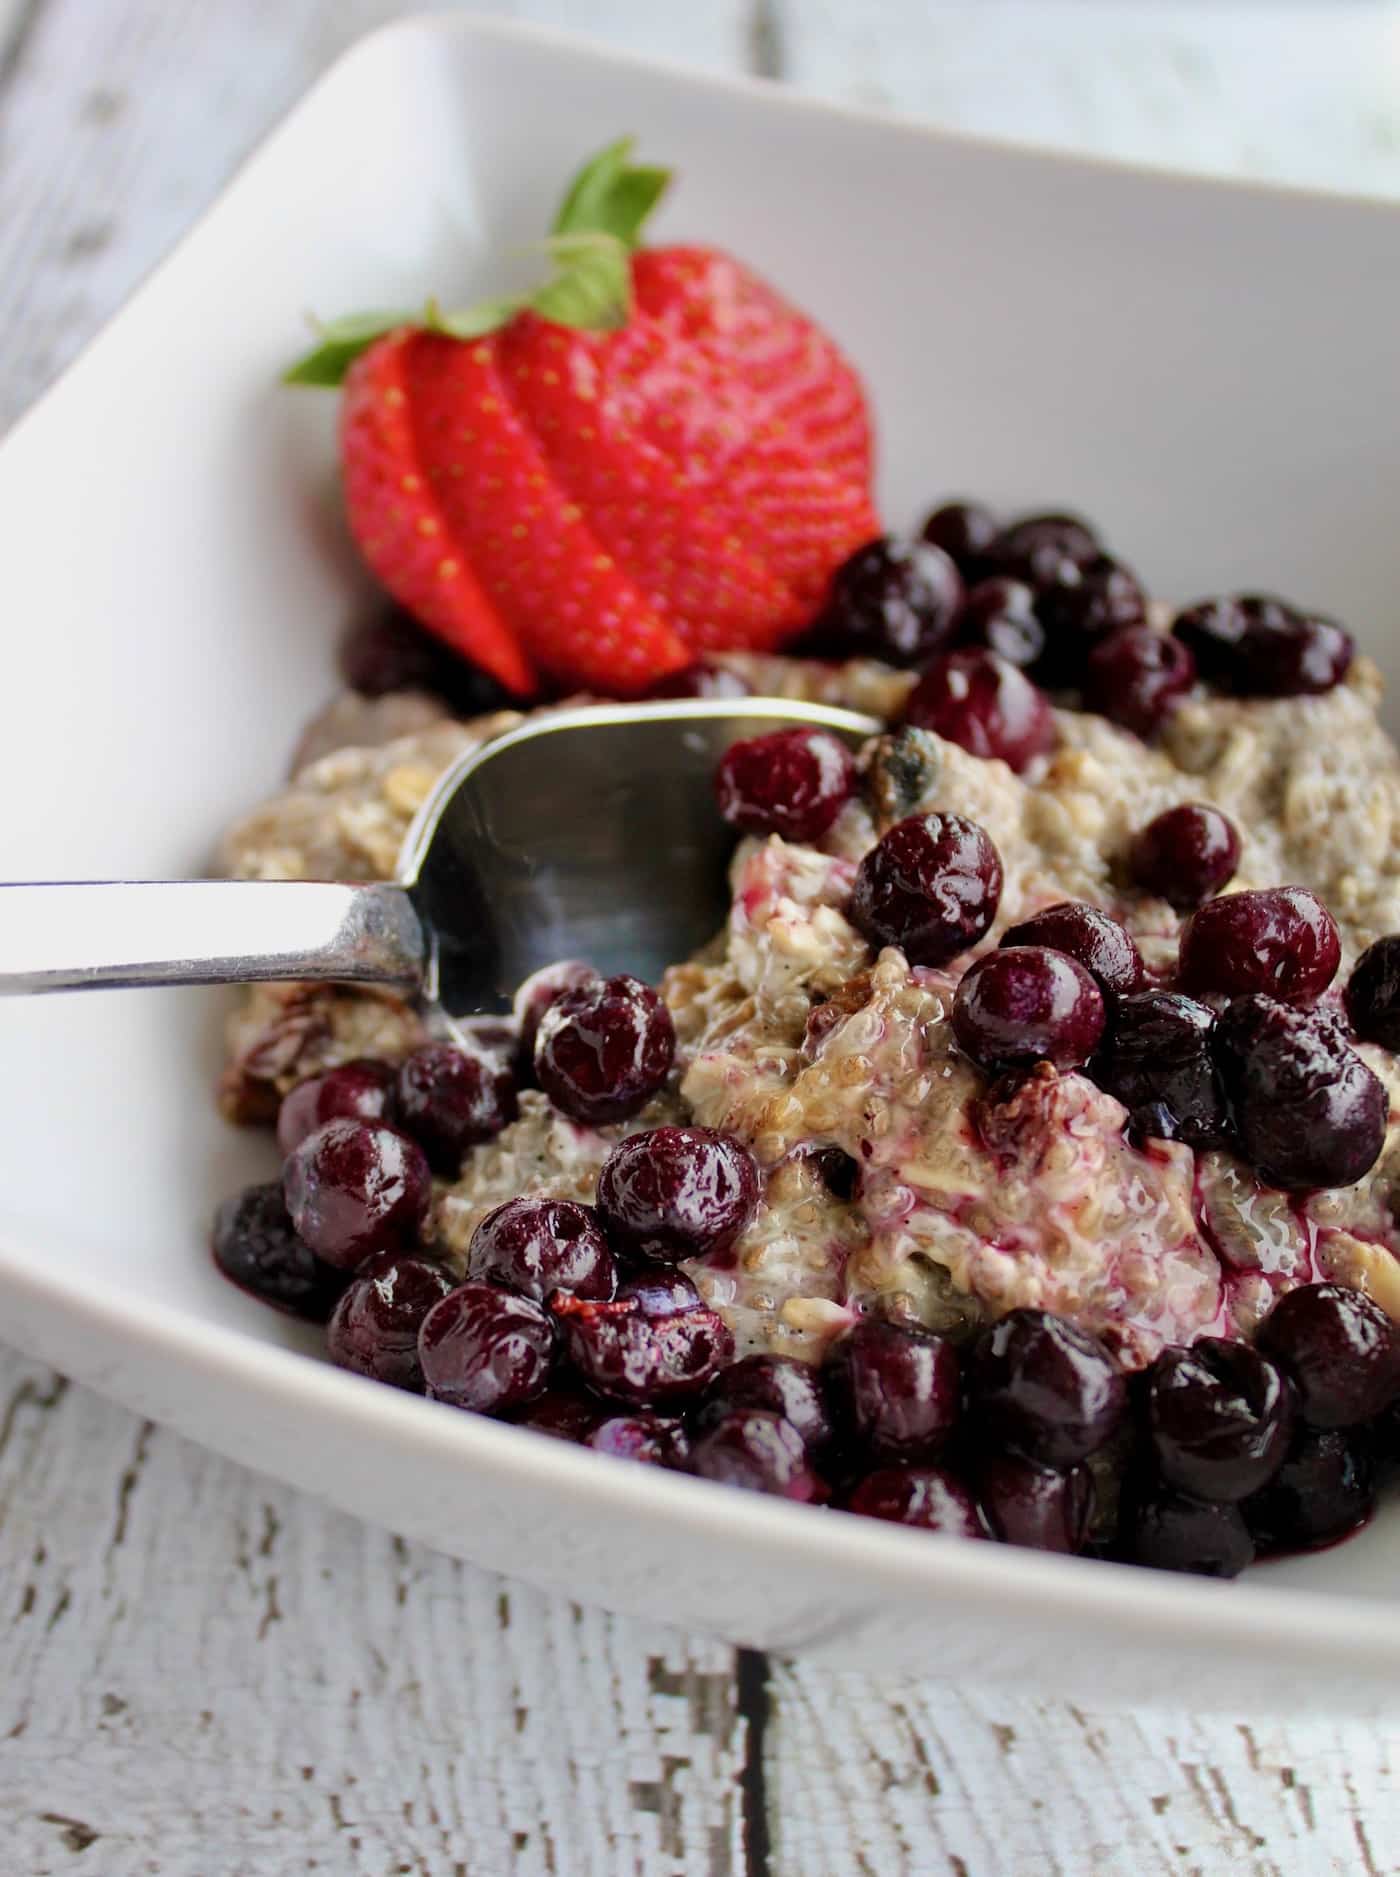 Here's an easy Chia Breakfast Pudding recipe that can be assembled the night before so it's ready for a quick and healthy breakfast perfect for a nutritarian or vegan diet. This nutritarian breakfast recipe comes from Dr. Fuhrman's book, The End of Dieting.